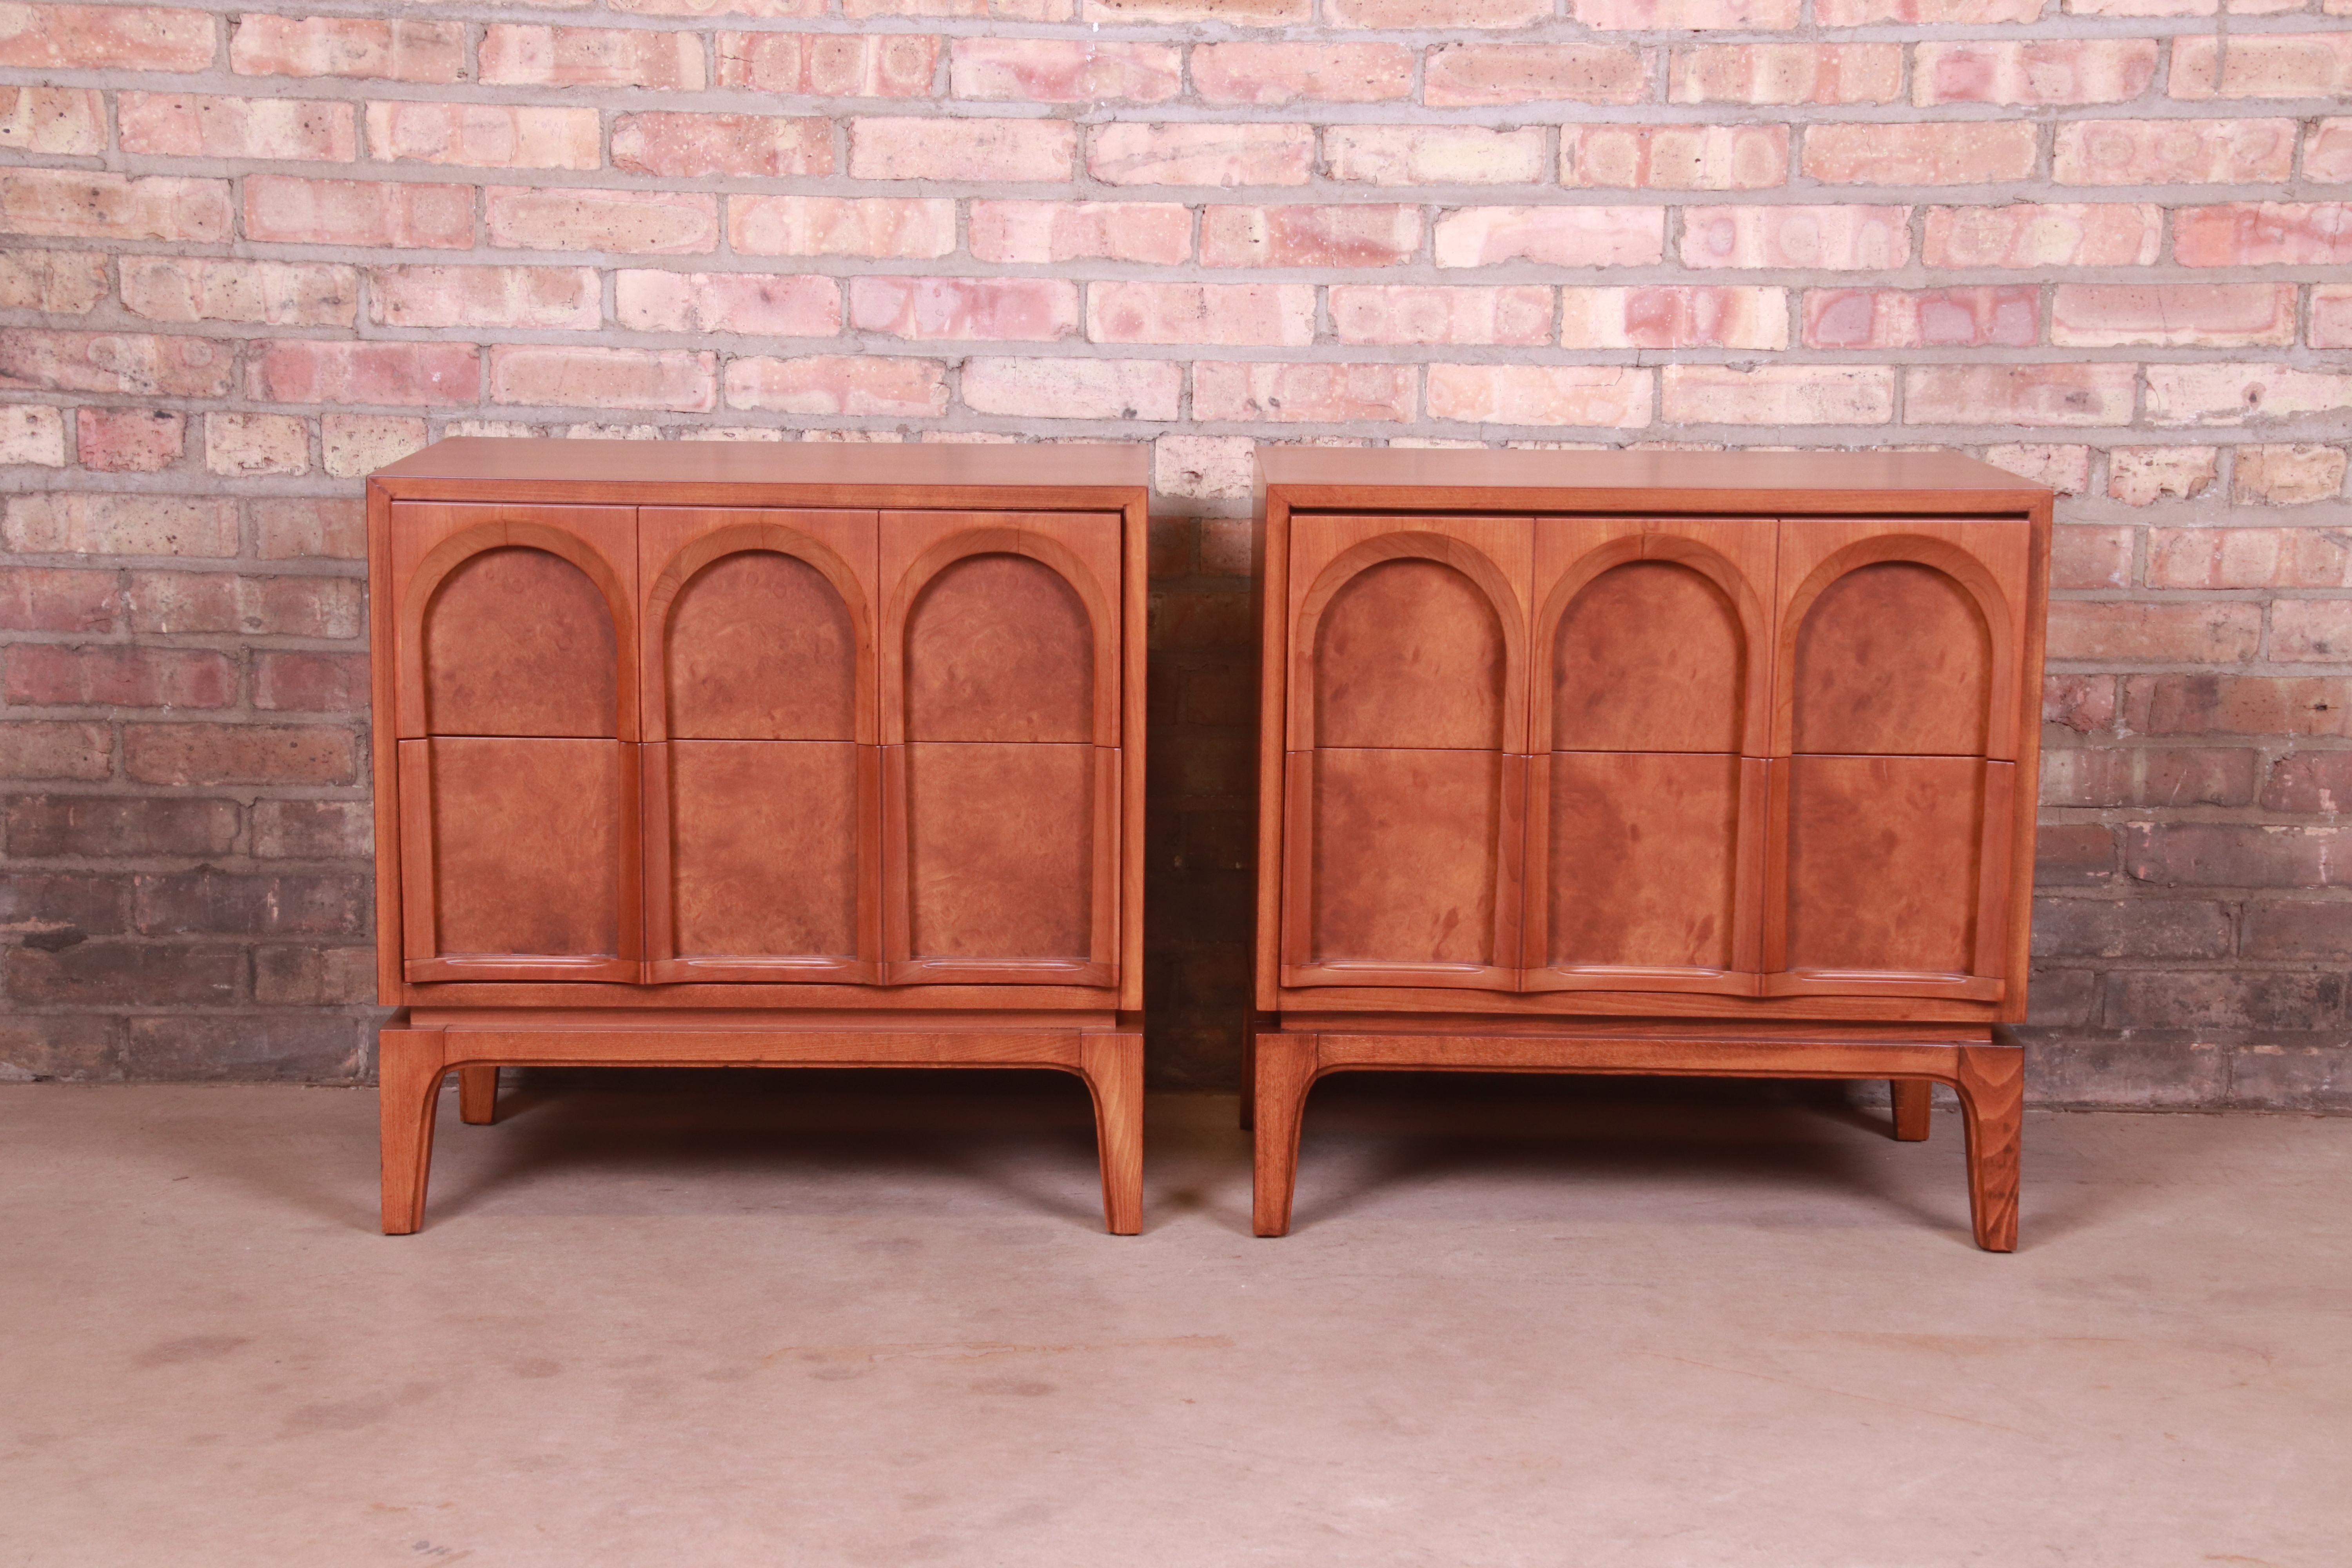 An exceptional pair of Mid-Century Modern nightstands

In the manner of T.H. Robsjohn-Gibbings 